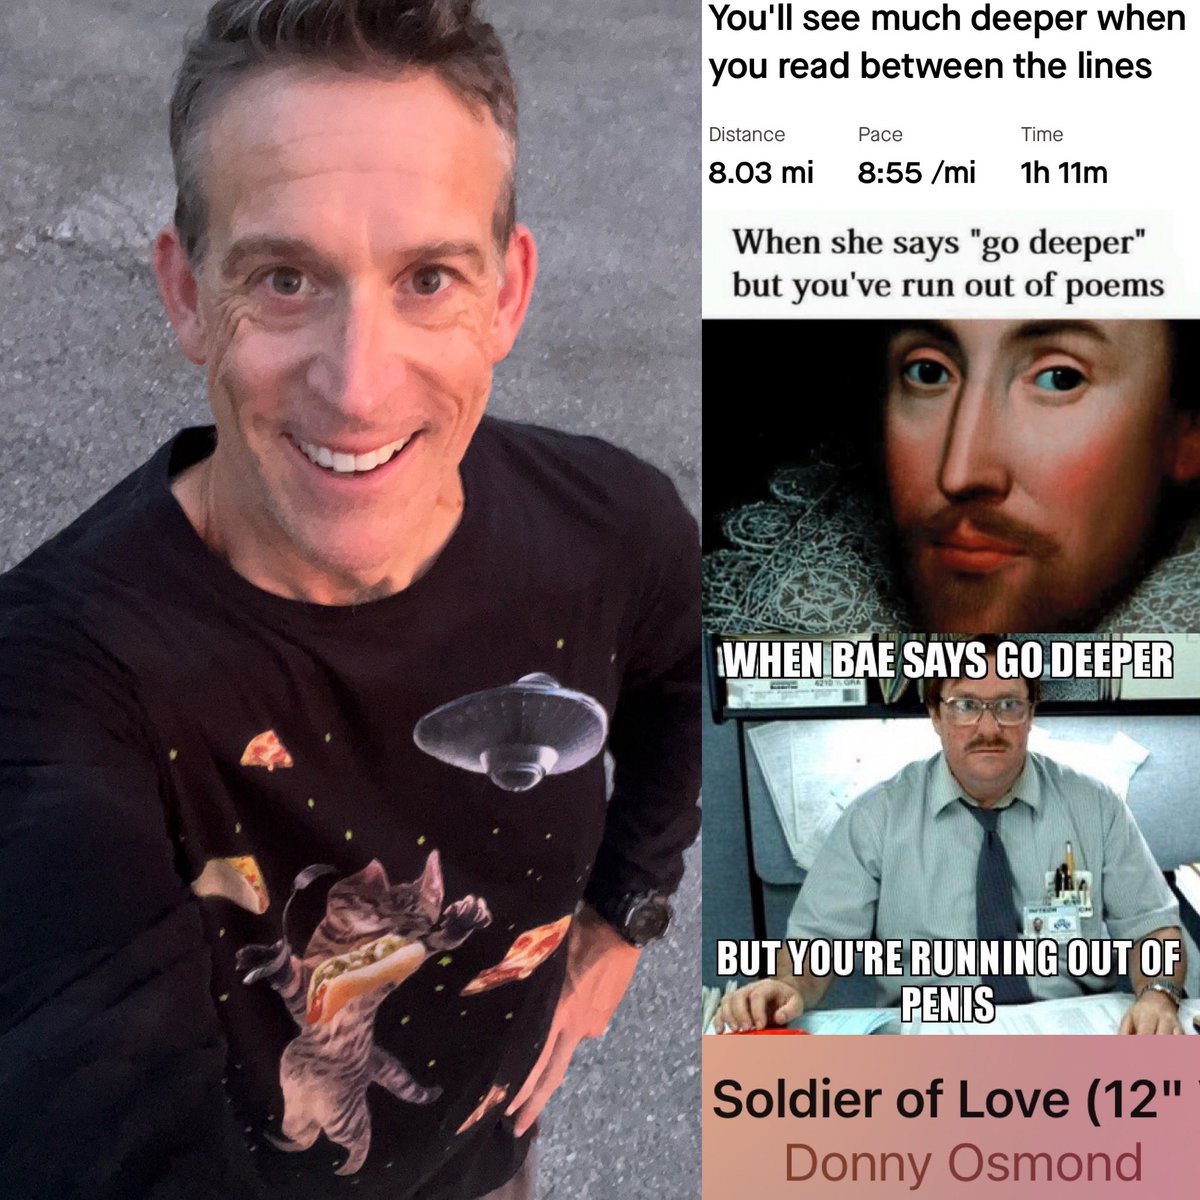 This is the first time, and I hope last, that I had a reason to think of Donny Osmond’s 12” soldier of love. #soldieroflove #morningrun #godeeper #poetry